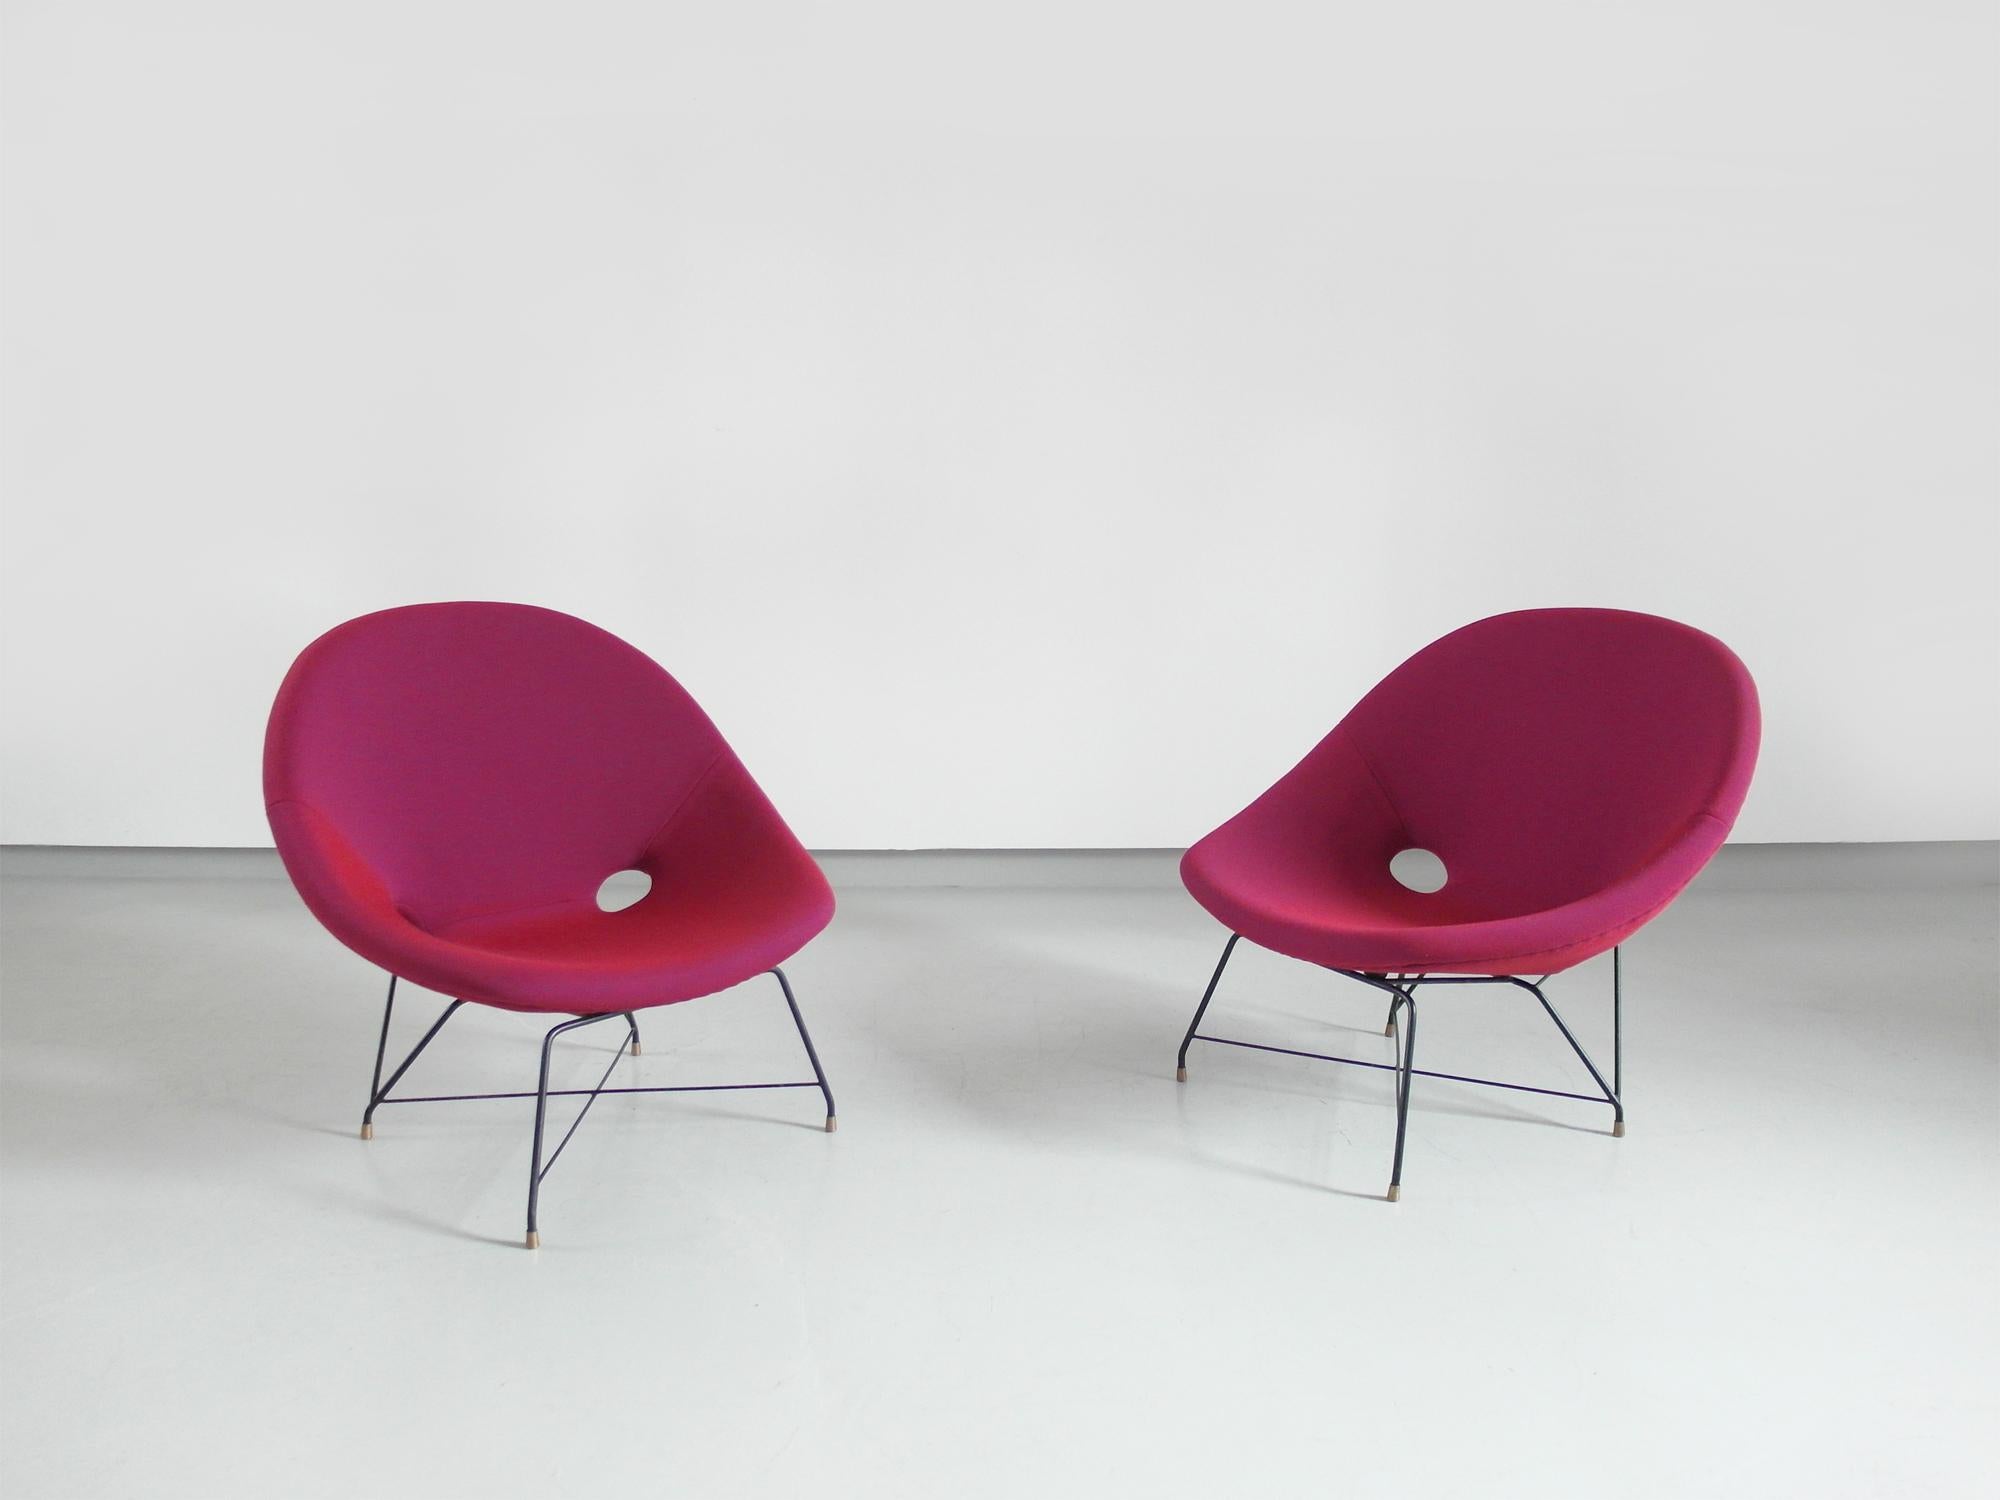 Perfectly upholstered in Raspberry fabric, pair of Cosmos lounge chairs designed by Augusto Bozzi for Saporiti Italia, Italy 1954.
The black coated metal wire frames with solid brass feet give the chairs an elegant and delicate appearance. The